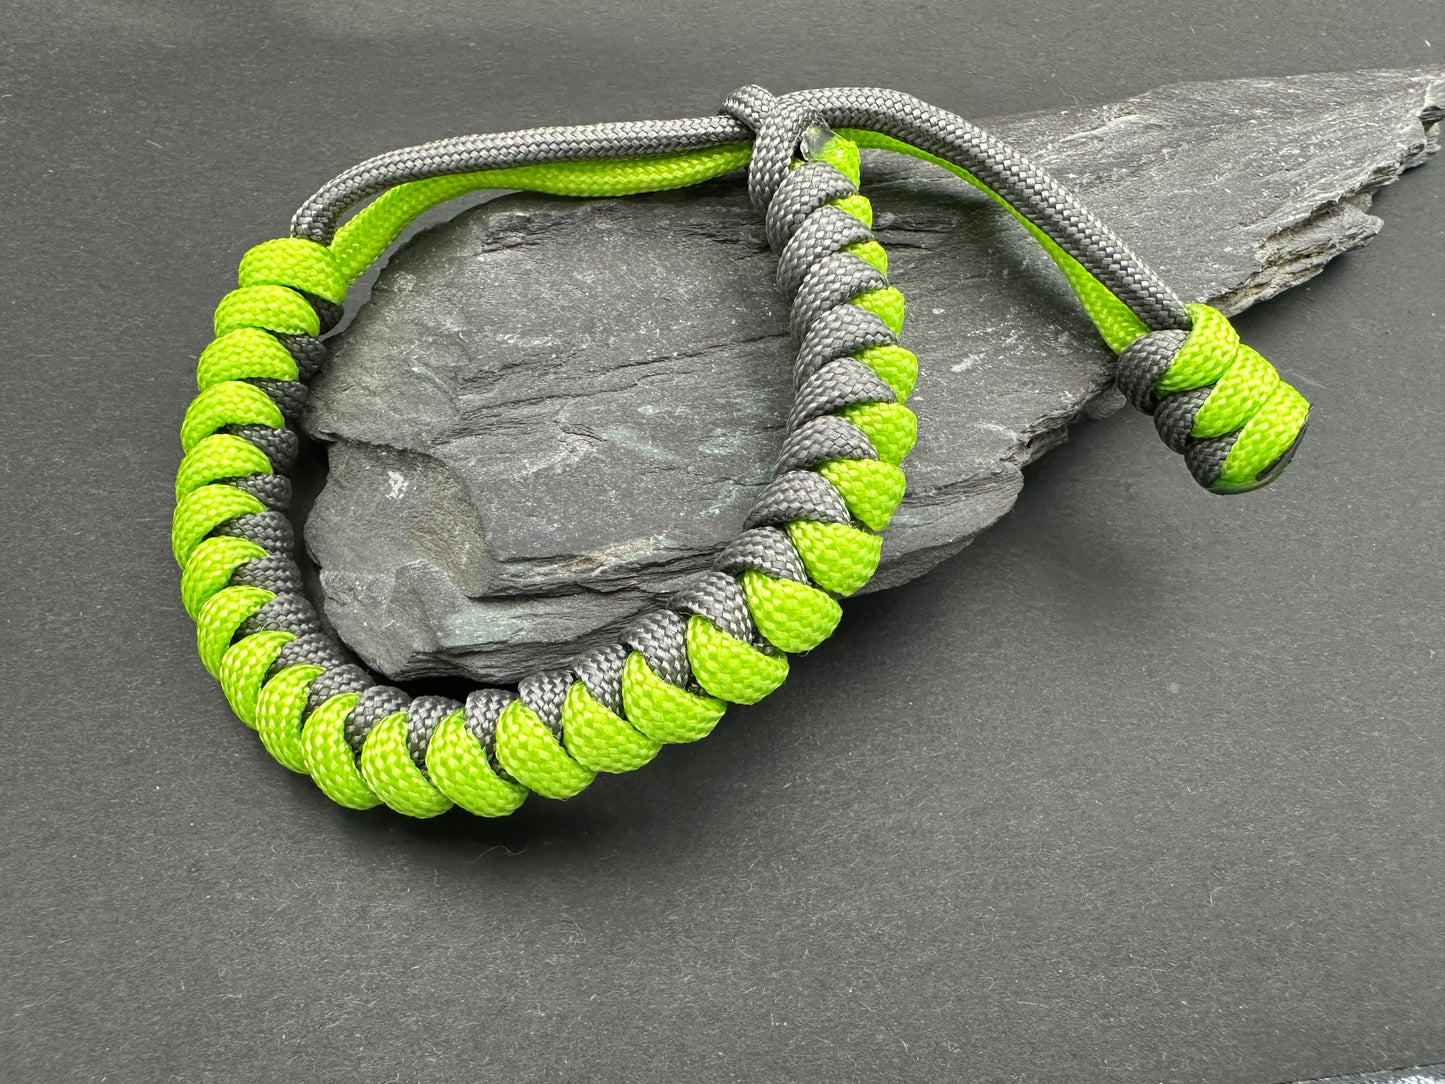 Paracord survival bracelets in Anthracite grey and neon green colour. the item is lightweight comfortable and handmade in a snake knott tactical design U.K.